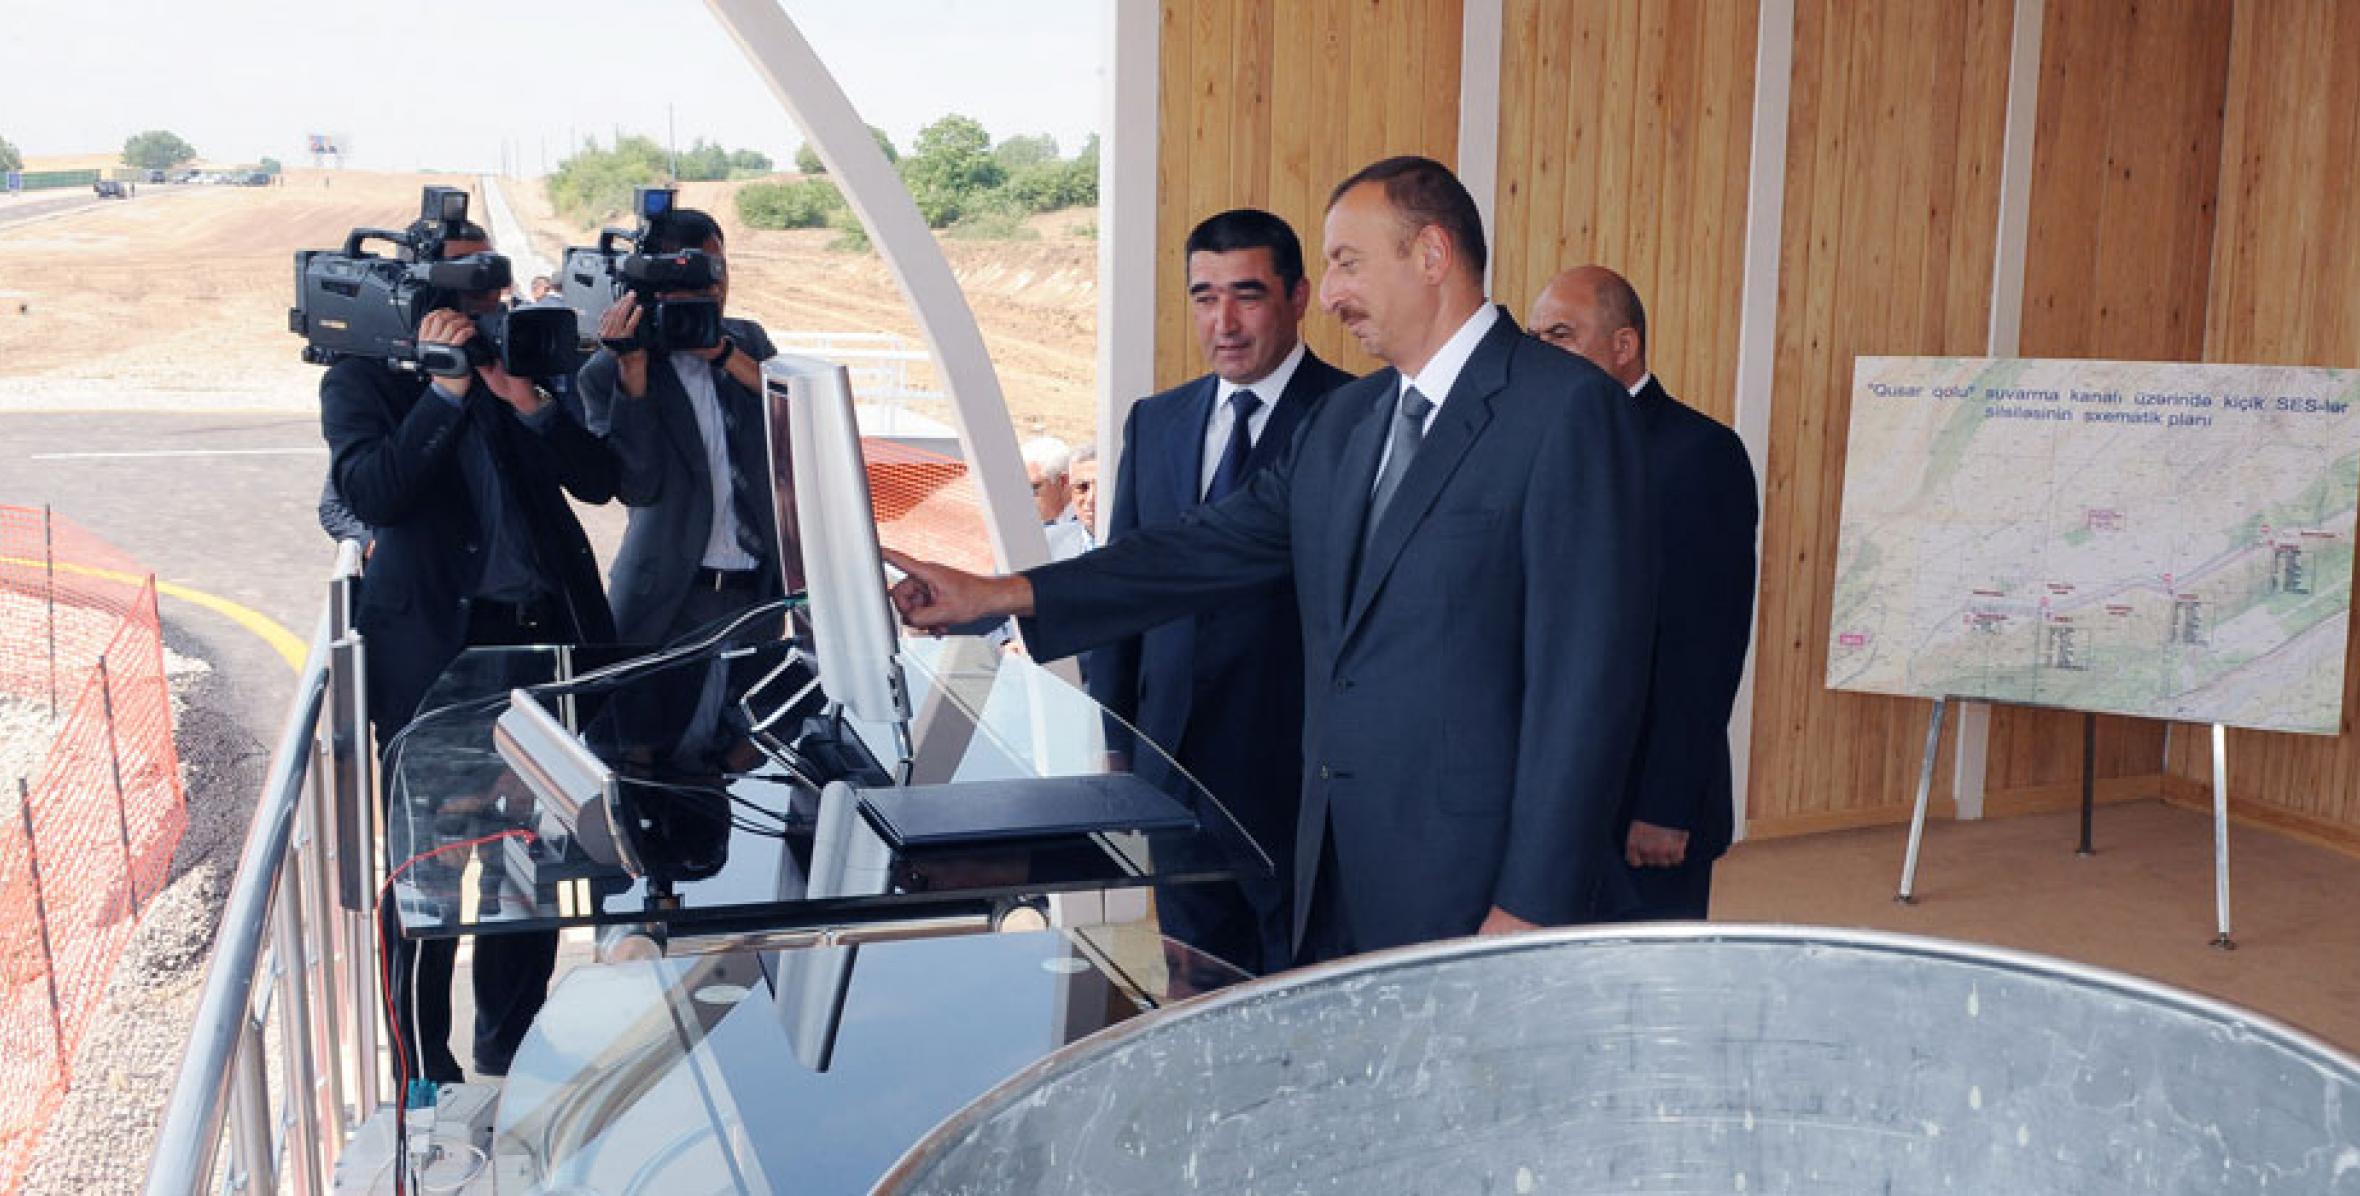 Ilham Aliyev took part in the groundbreaking ceremony of Gusar 1 Hydropower Plant